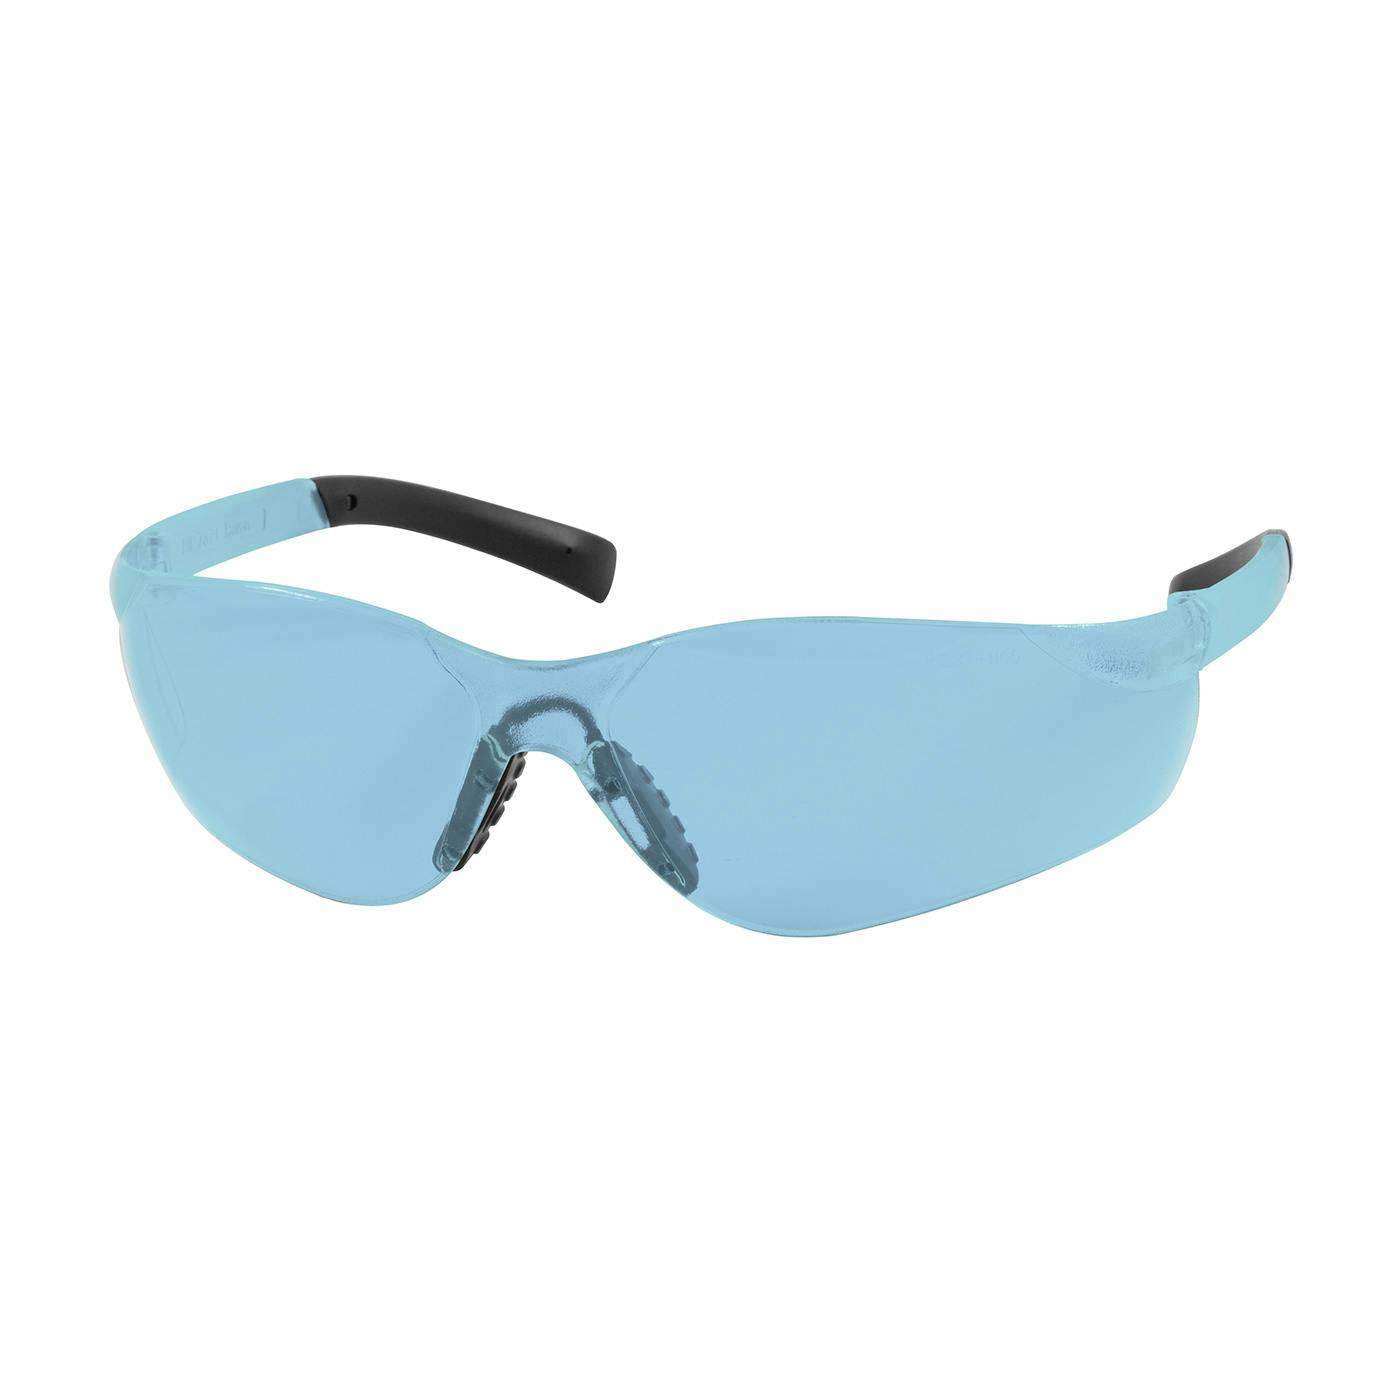 Rimless Safety Glasses with Light Blue Temple, Light Blue Lens and Anti-Scratch Coating, Light Blue (250-08-5503) - OS_0